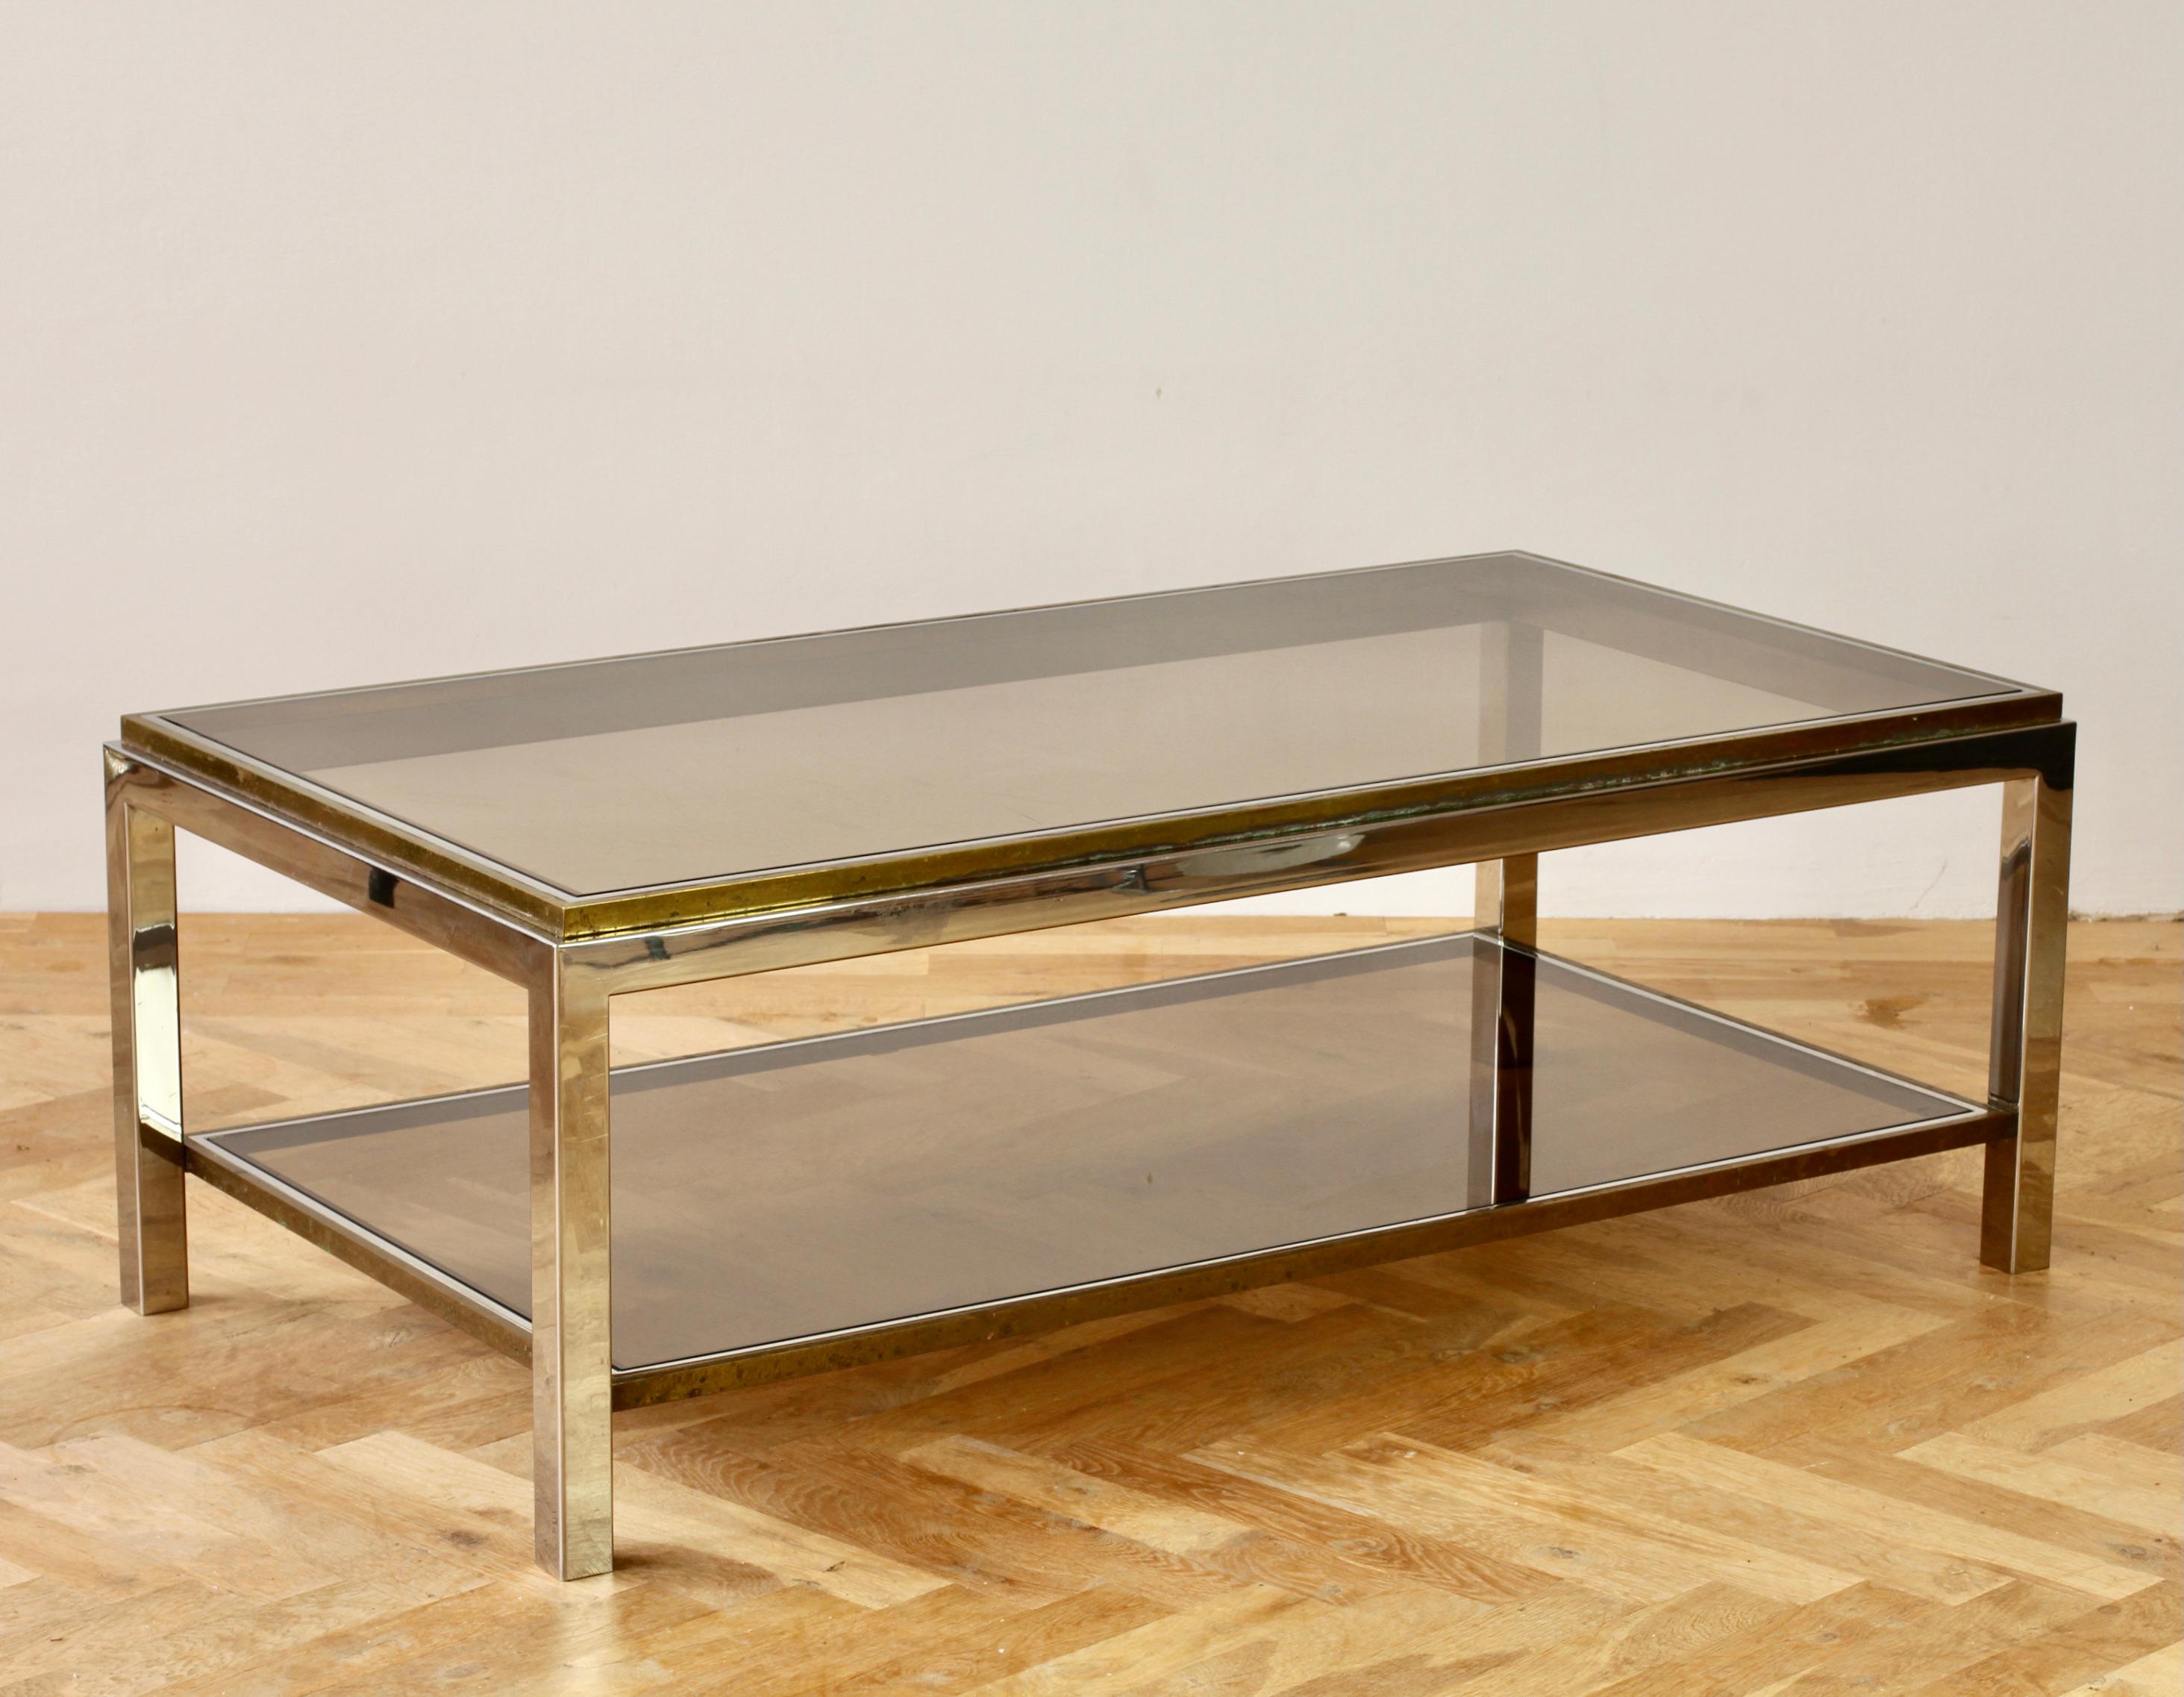 20th Century Willy Rizzo Style Mid-Century Brass and Chrome Bicolor Coffee Table, circa 1970s For Sale